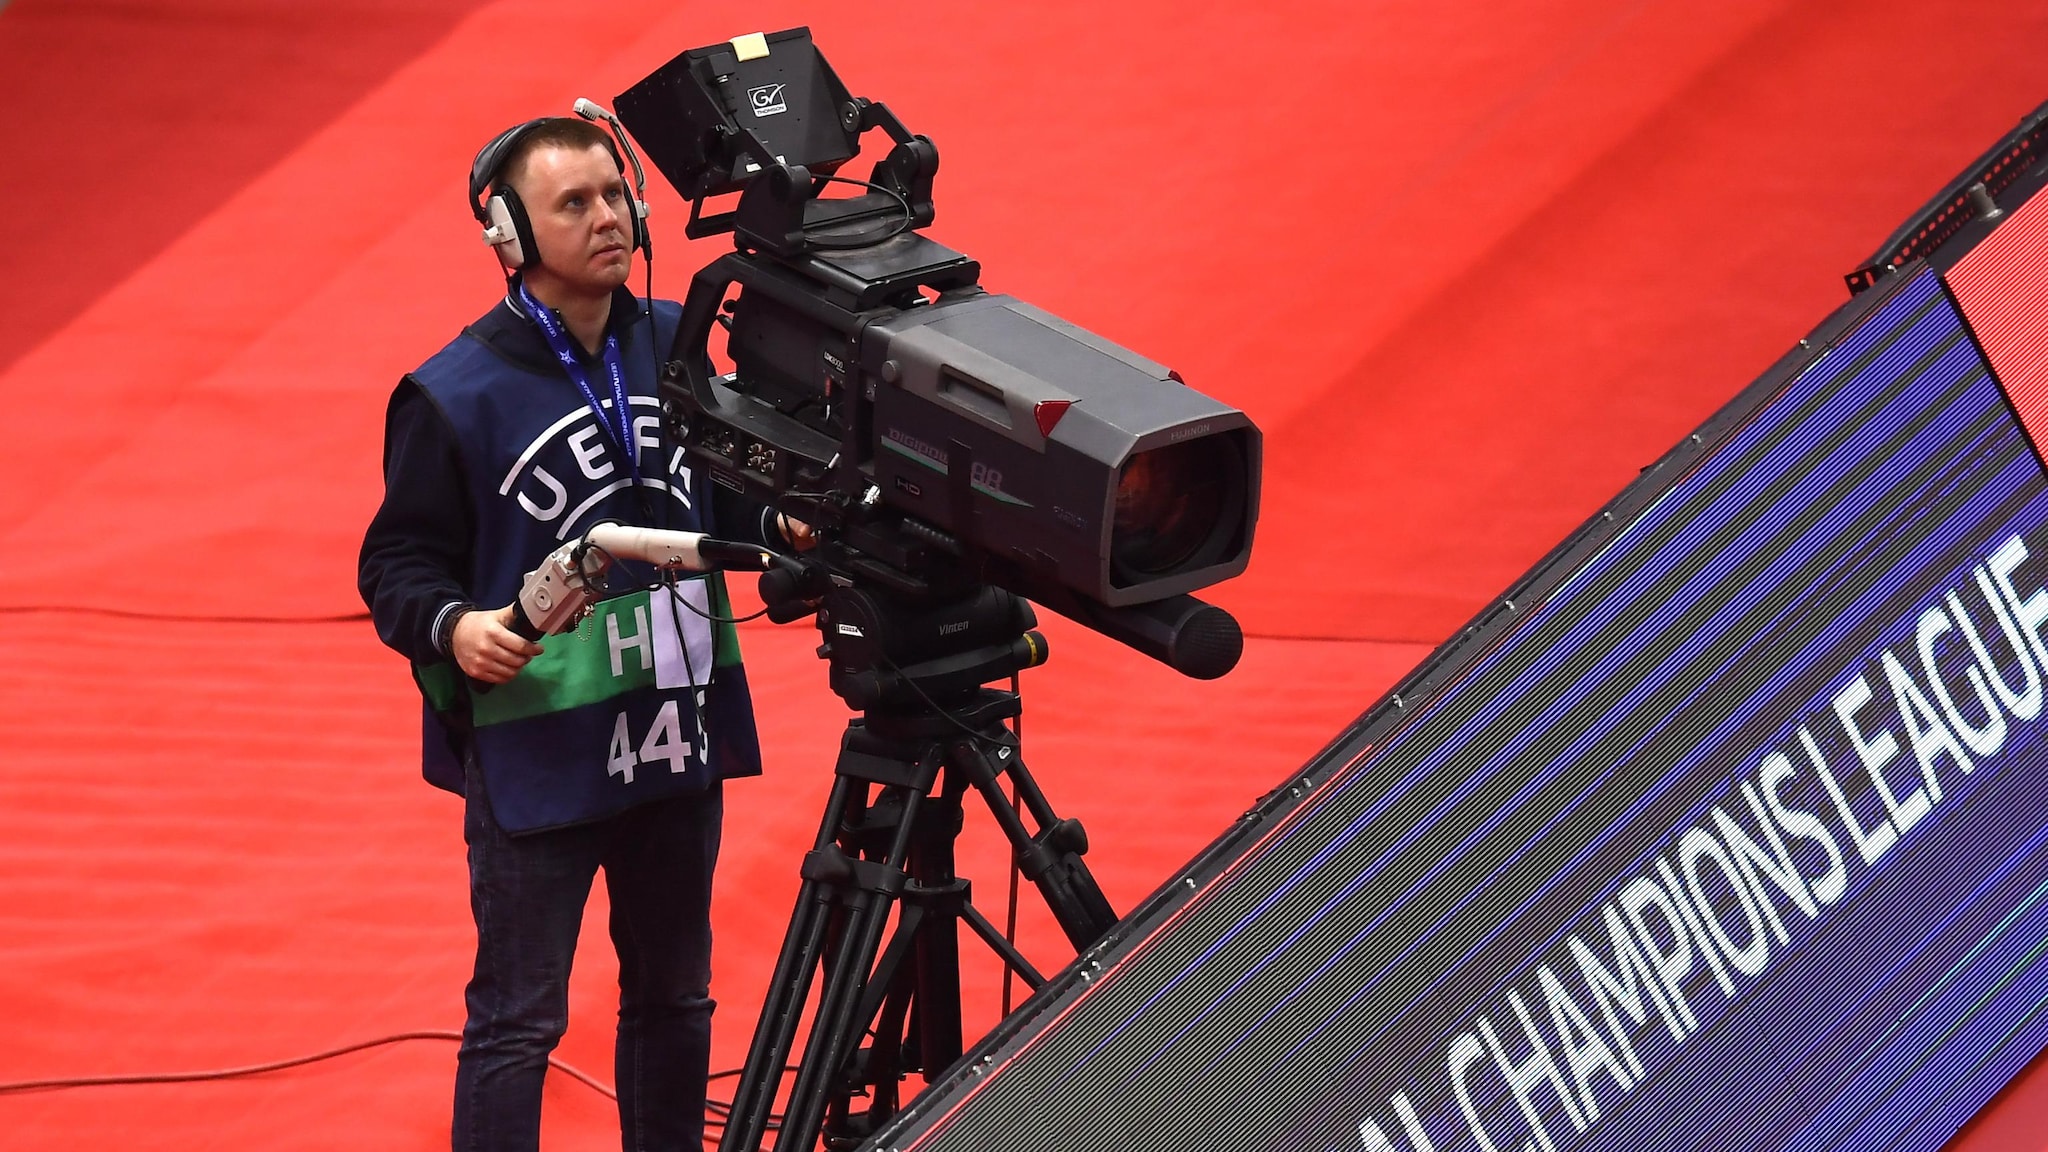 TV & Live Broadcast: Where is the UEFA Champions League Futsal Going?  |  Futsal Champions League